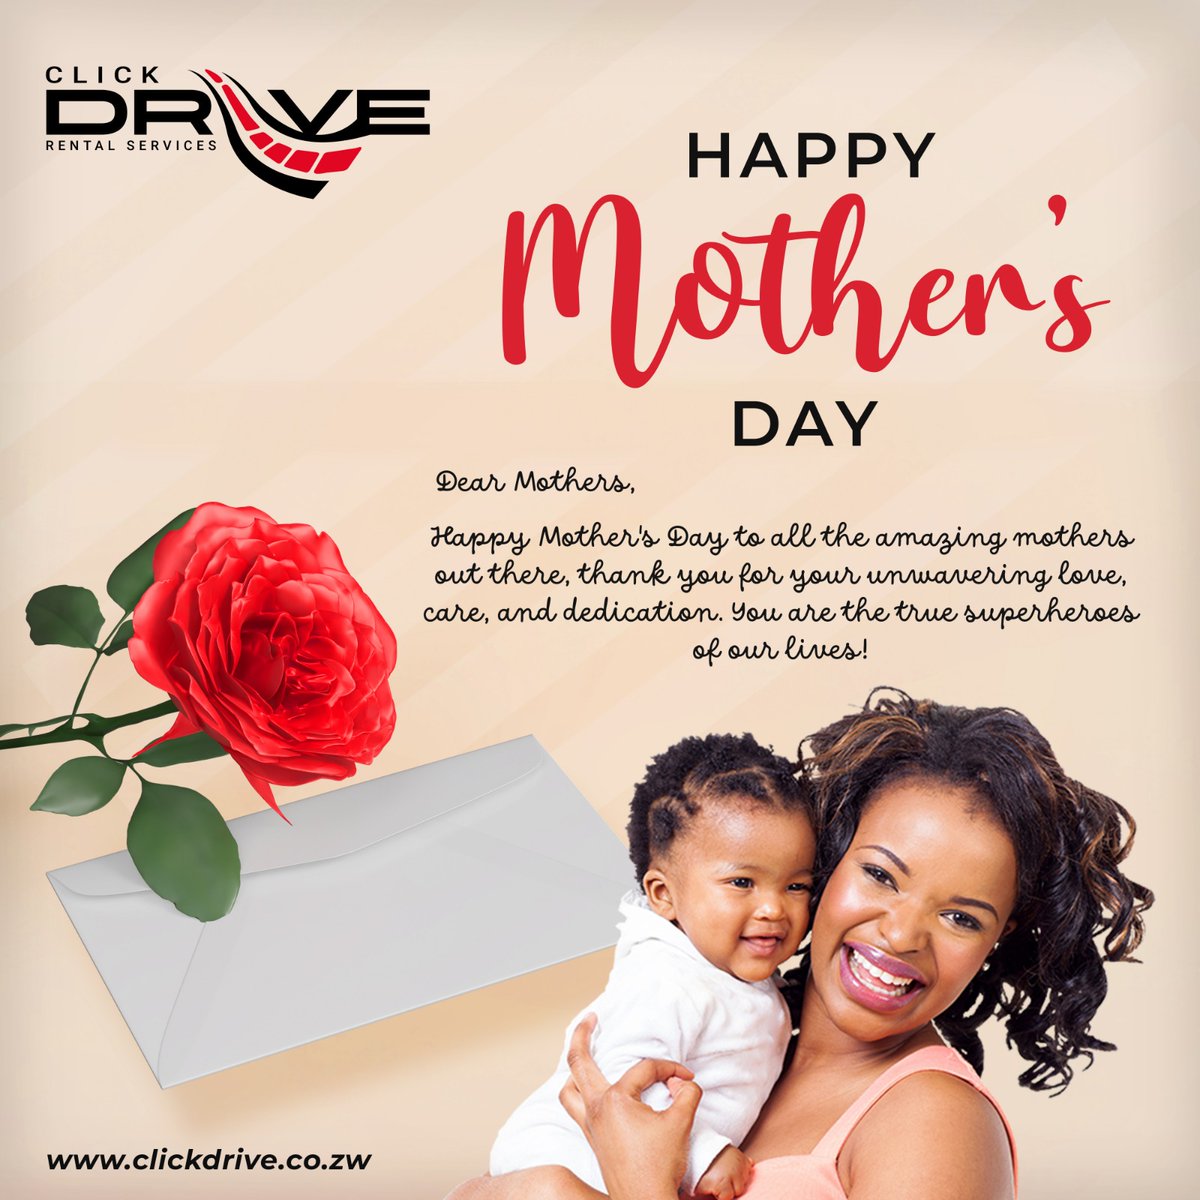 On this special day, we at Click Drive, would like to take a moment to wish all the amazing mothers out there a very Happy Mother’s Day. We celebrate and appreciate your tireless efforts, unconditional love, and the immense impact you have on our lives.❤️💐